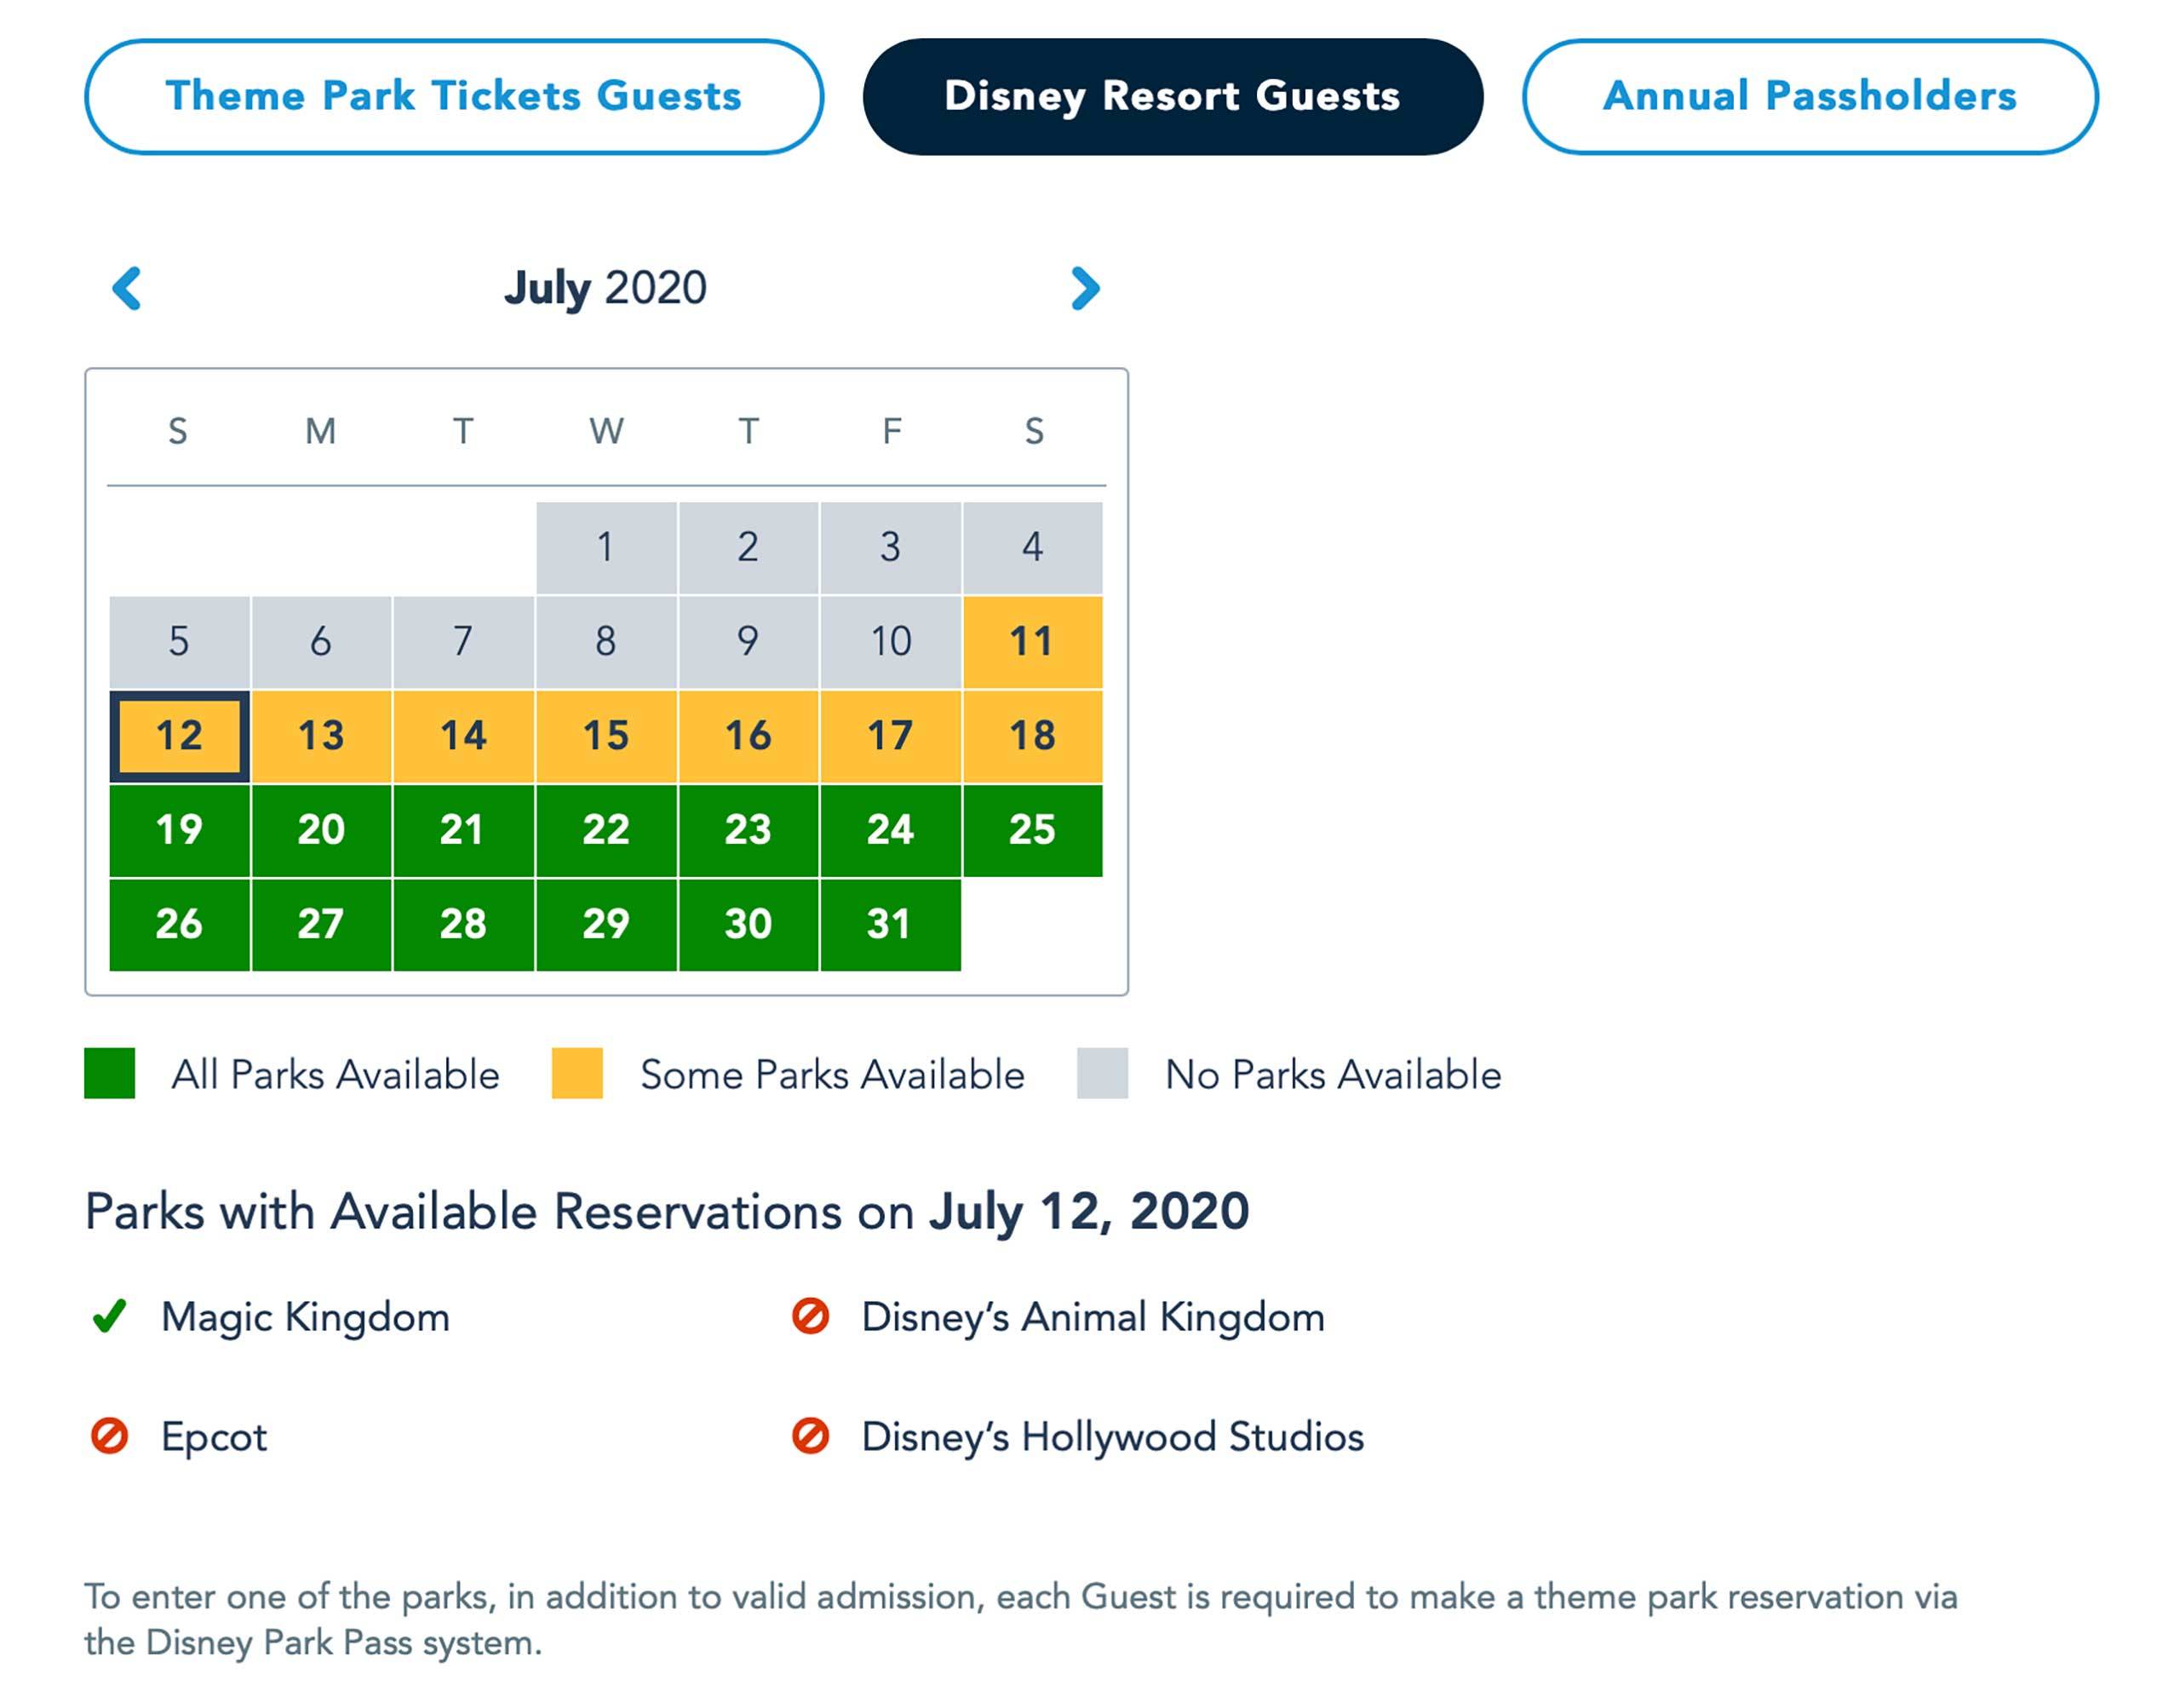 More days reach capacity for resort guests using Disney Parks Pass